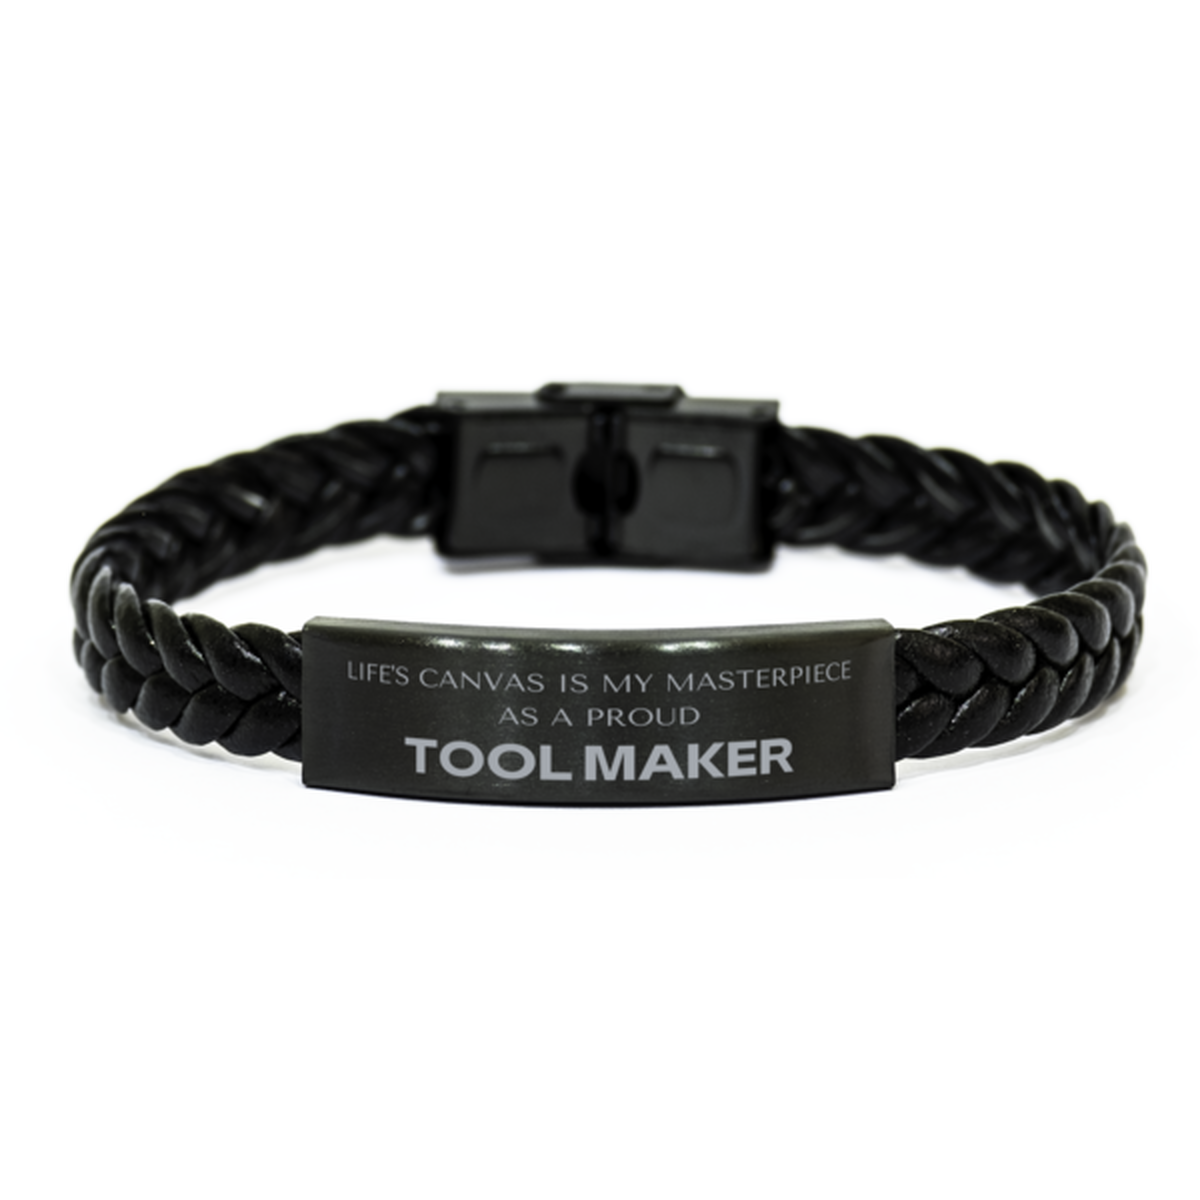 Proud Tool Maker Gifts, Life's canvas is my masterpiece, Epic Birthday Christmas Unique Braided Leather Bracelet For Tool Maker, Coworkers, Men, Women, Friends